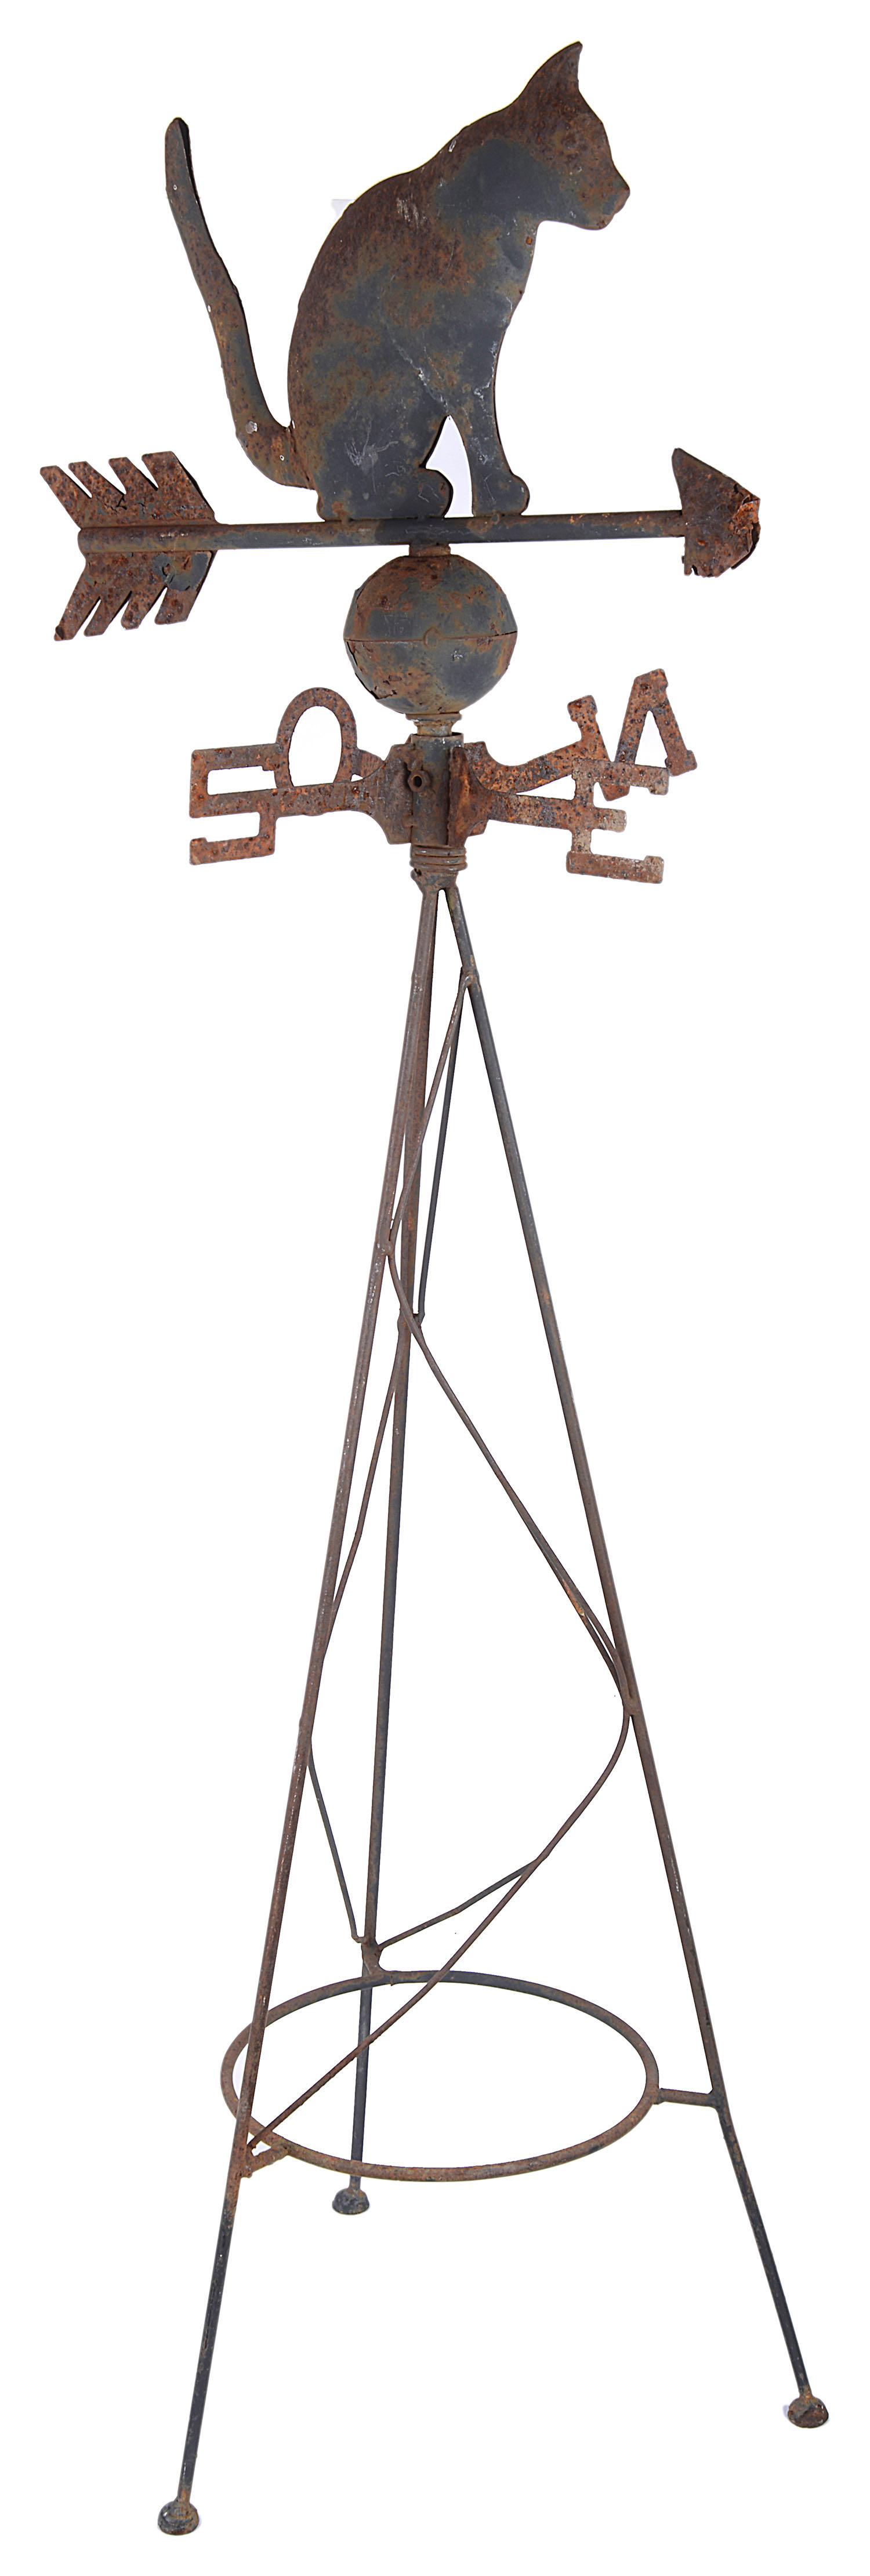 A Fr. black painted wrought iron weather vane